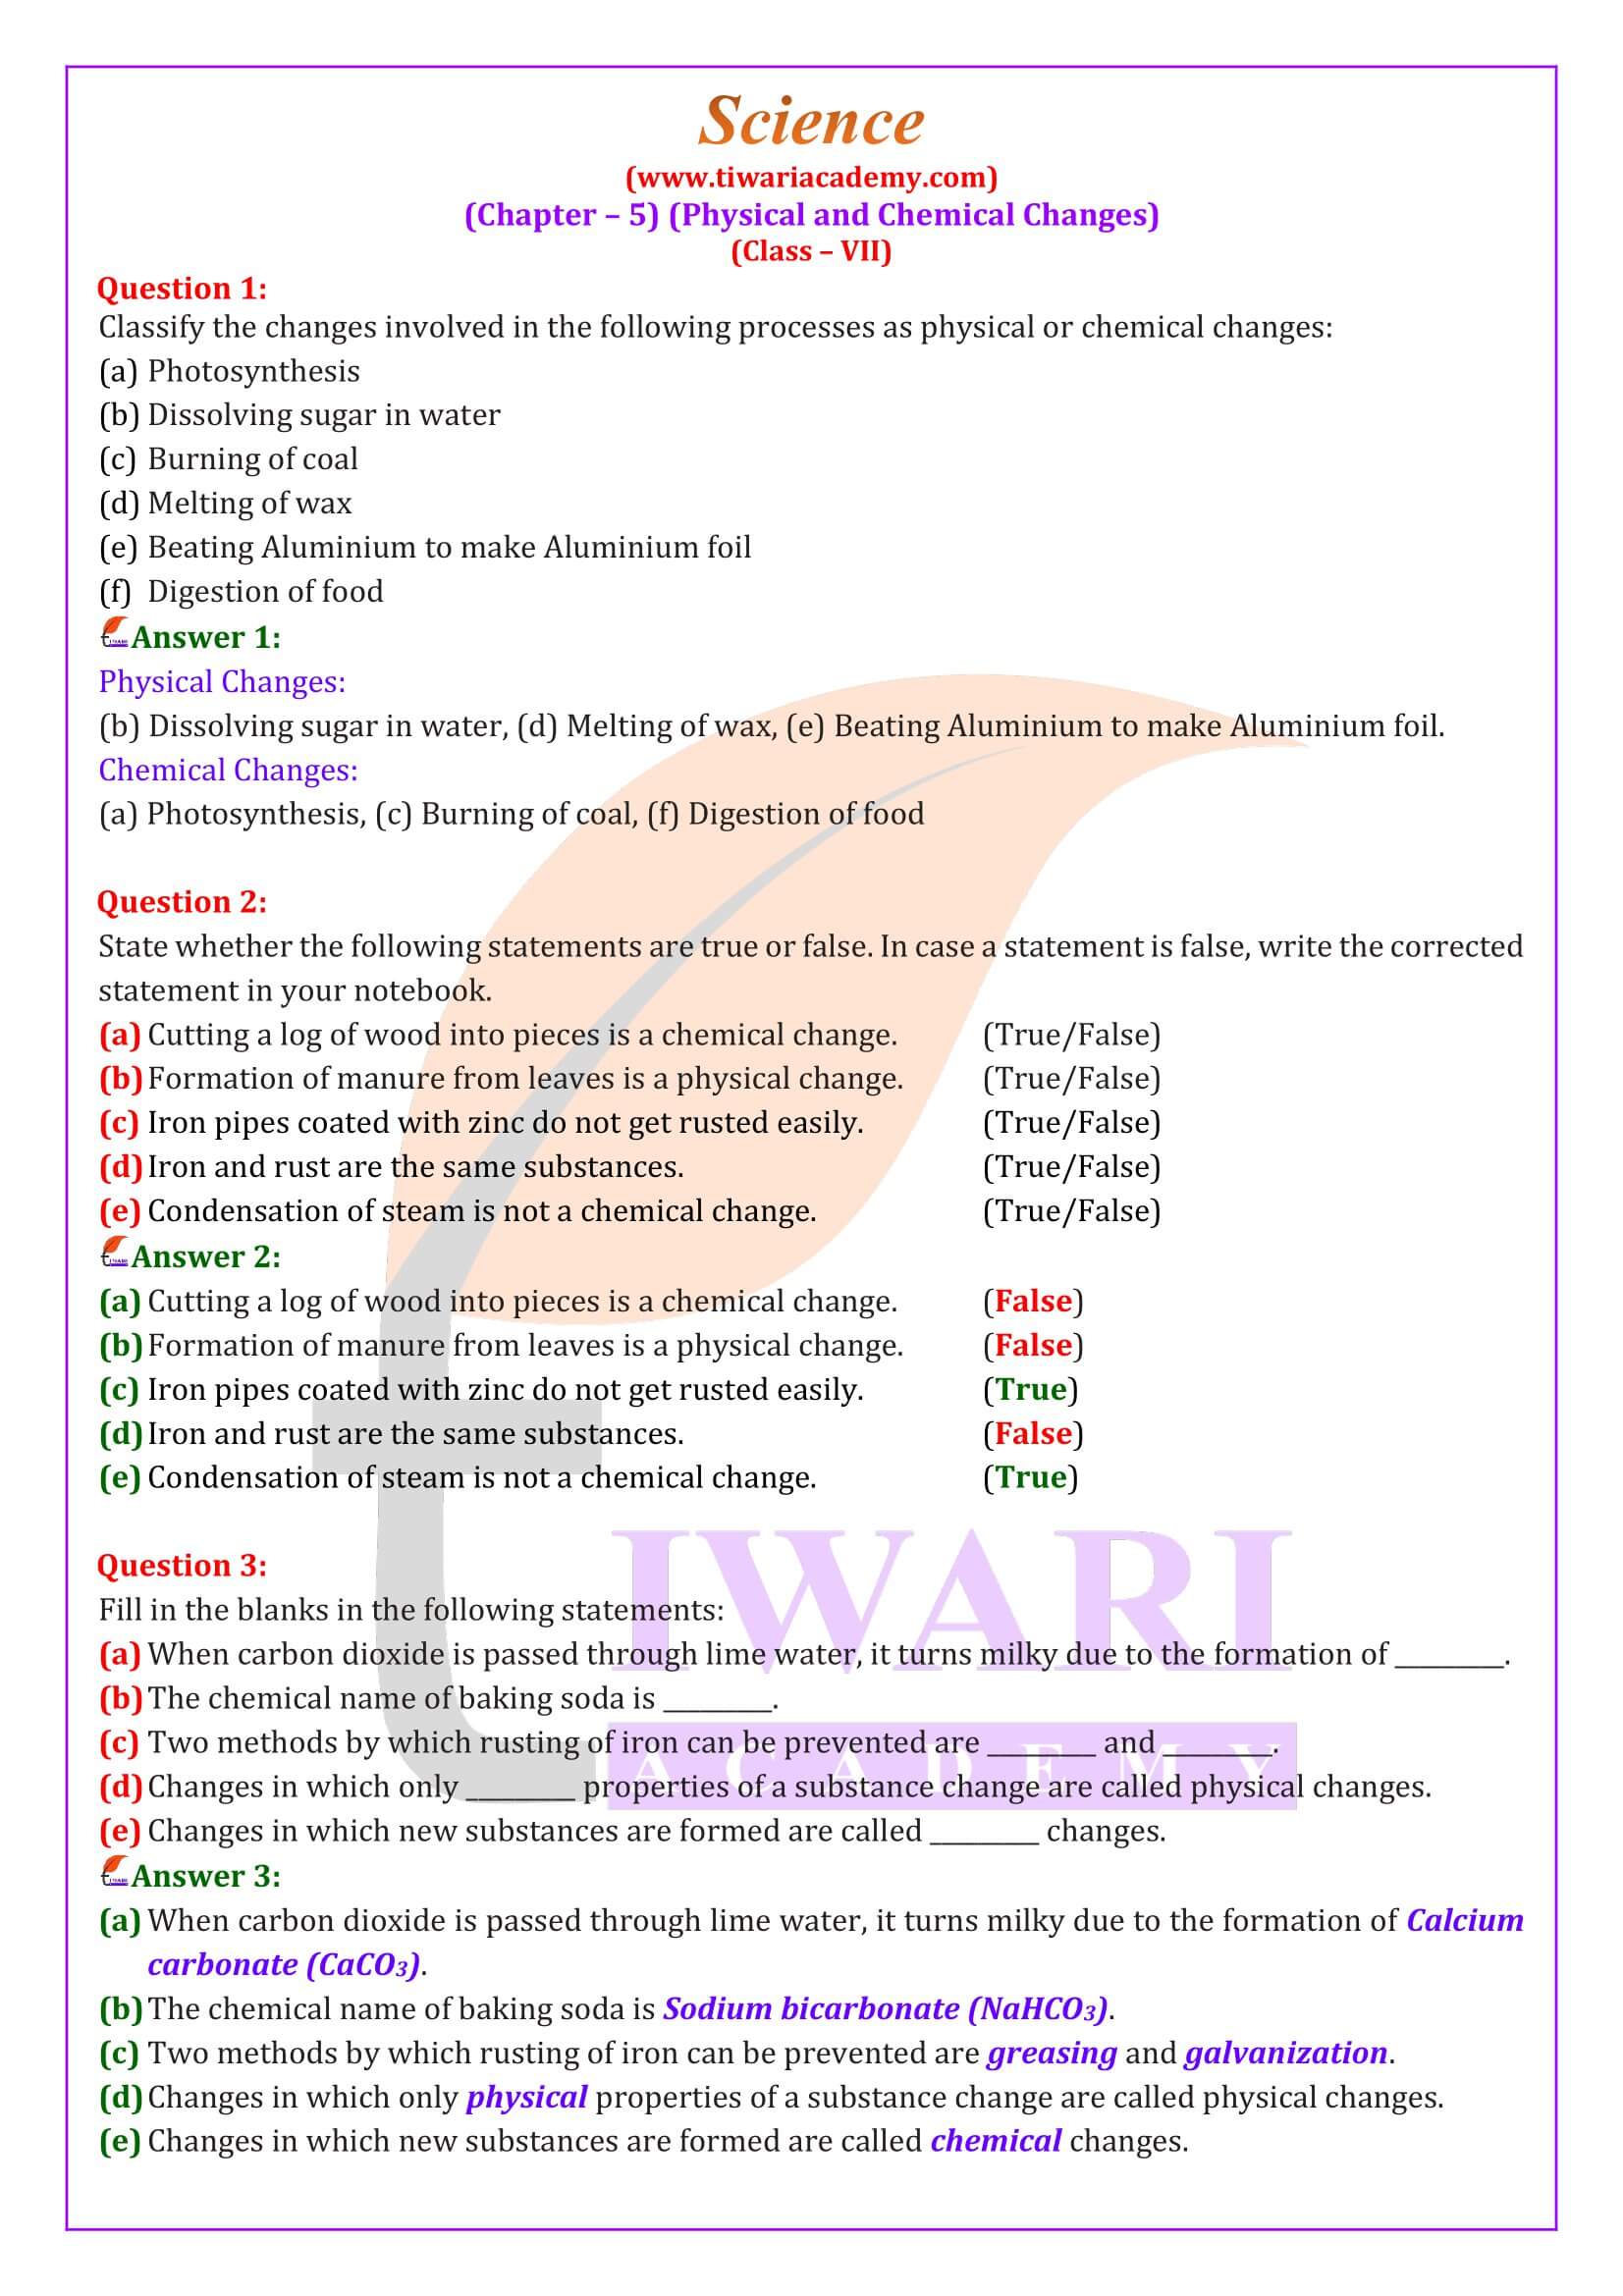 NCERT Solutions for Class 7 Science Chapter 5